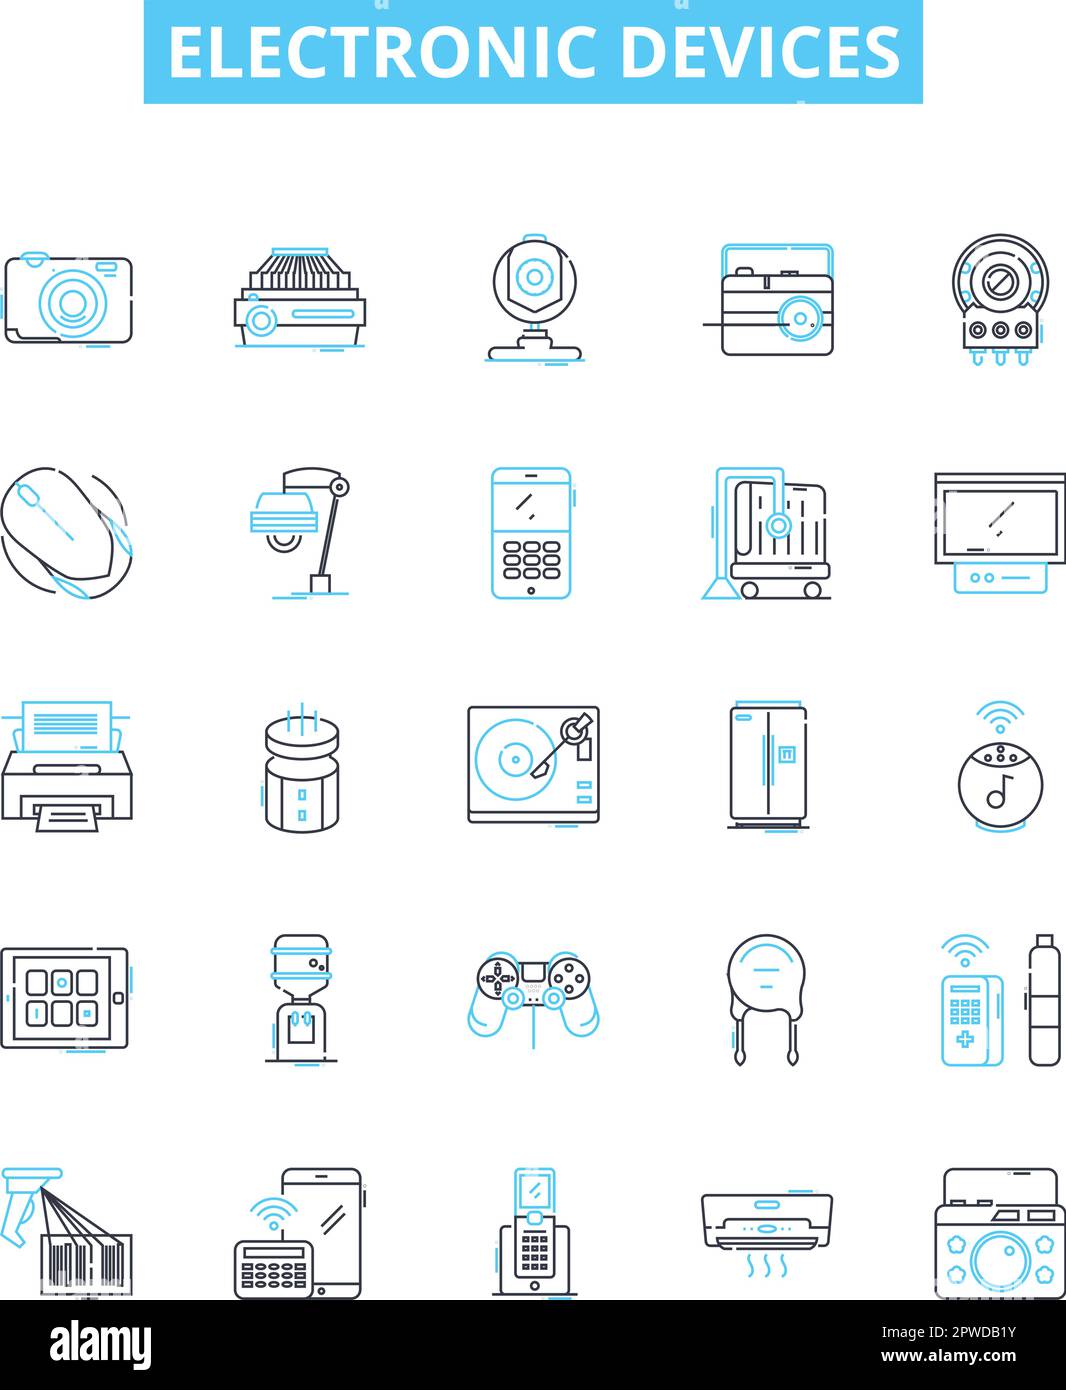 Electronic devices vector line icons set. Electronics, Devices, Digital, Components, Computers, Tablets, Phones illustration outline concept symbols Stock Vector